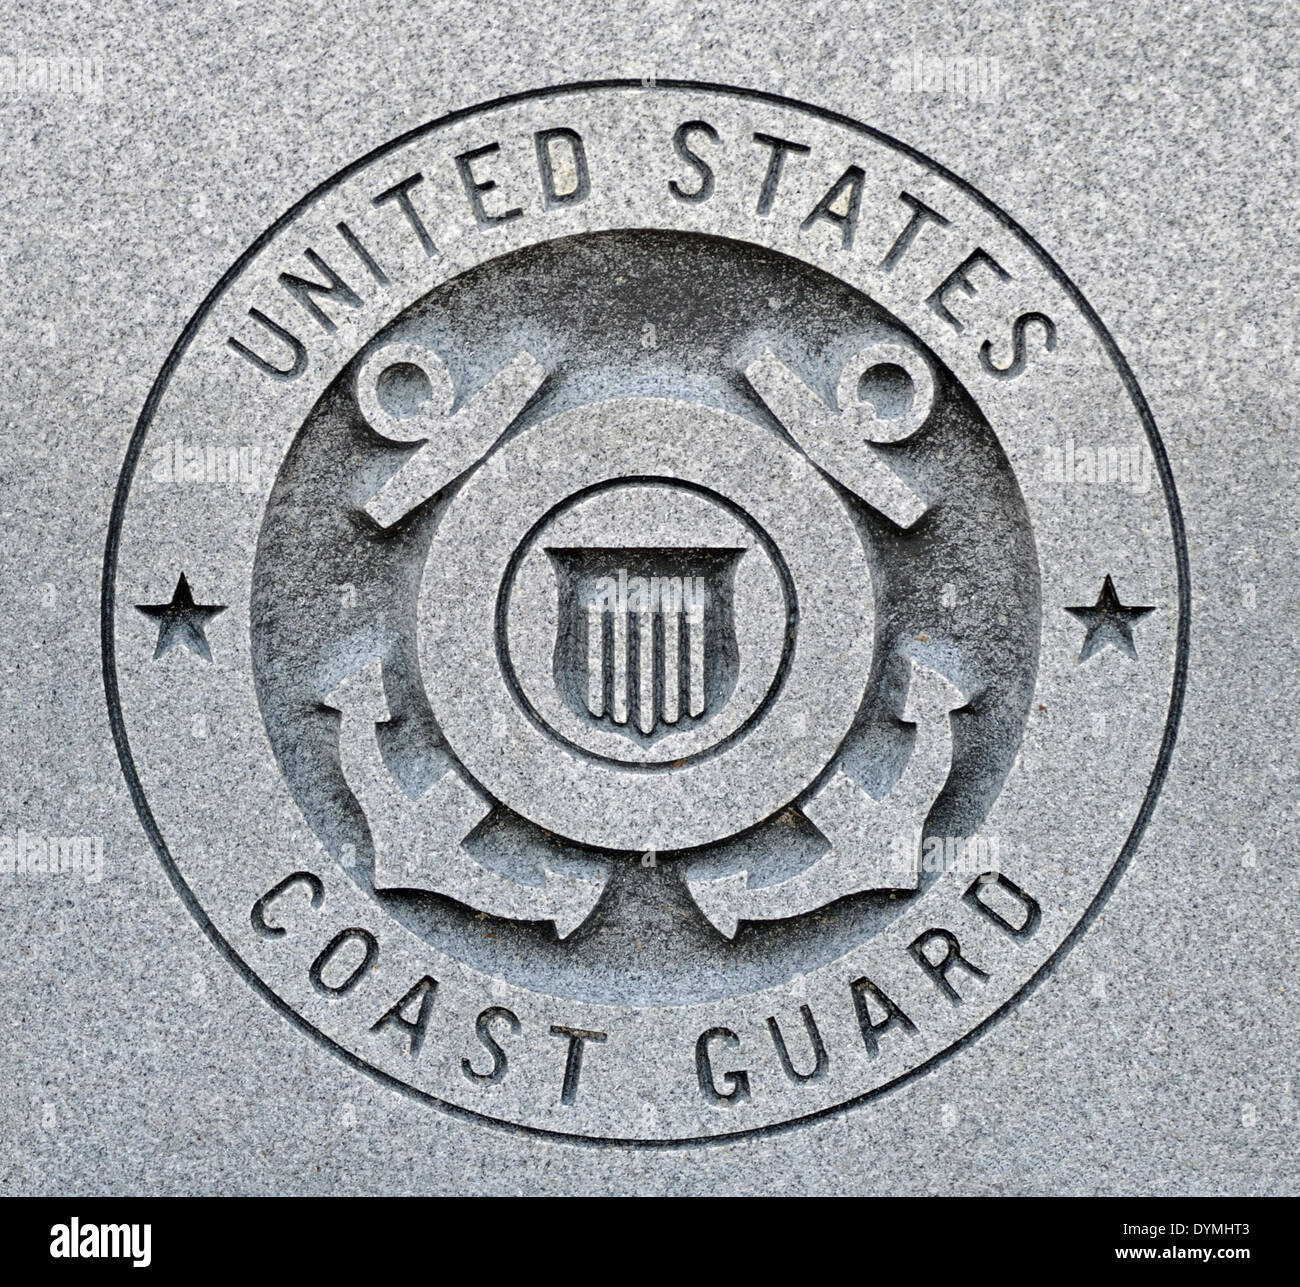 The seal of the United States Coast Guard engraved into granite Stock Photo